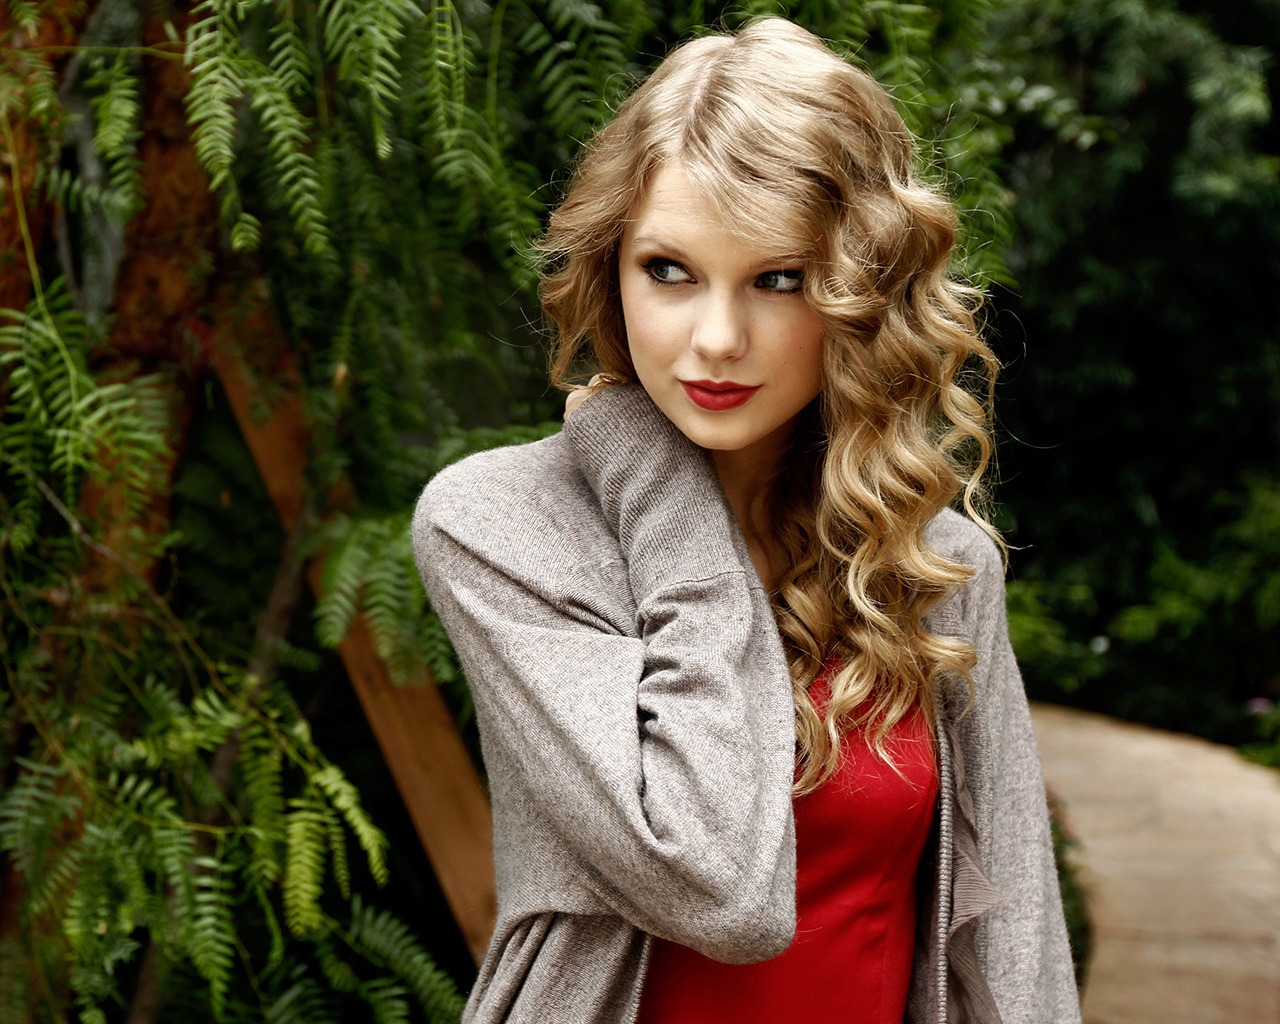 Smiling Taylor Swift Actress for 1280 x 1024 resolution